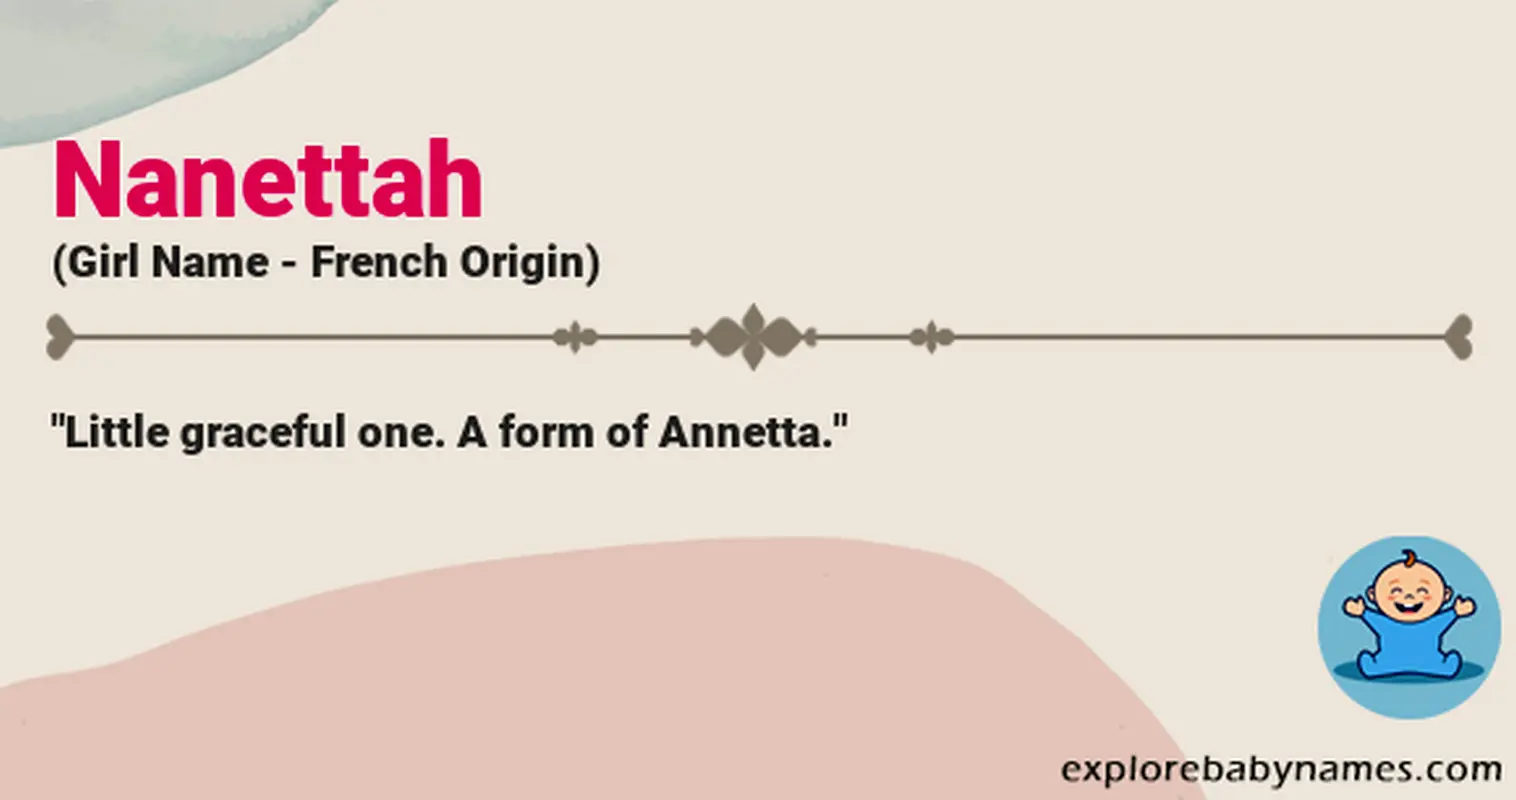 Meaning of Nanettah